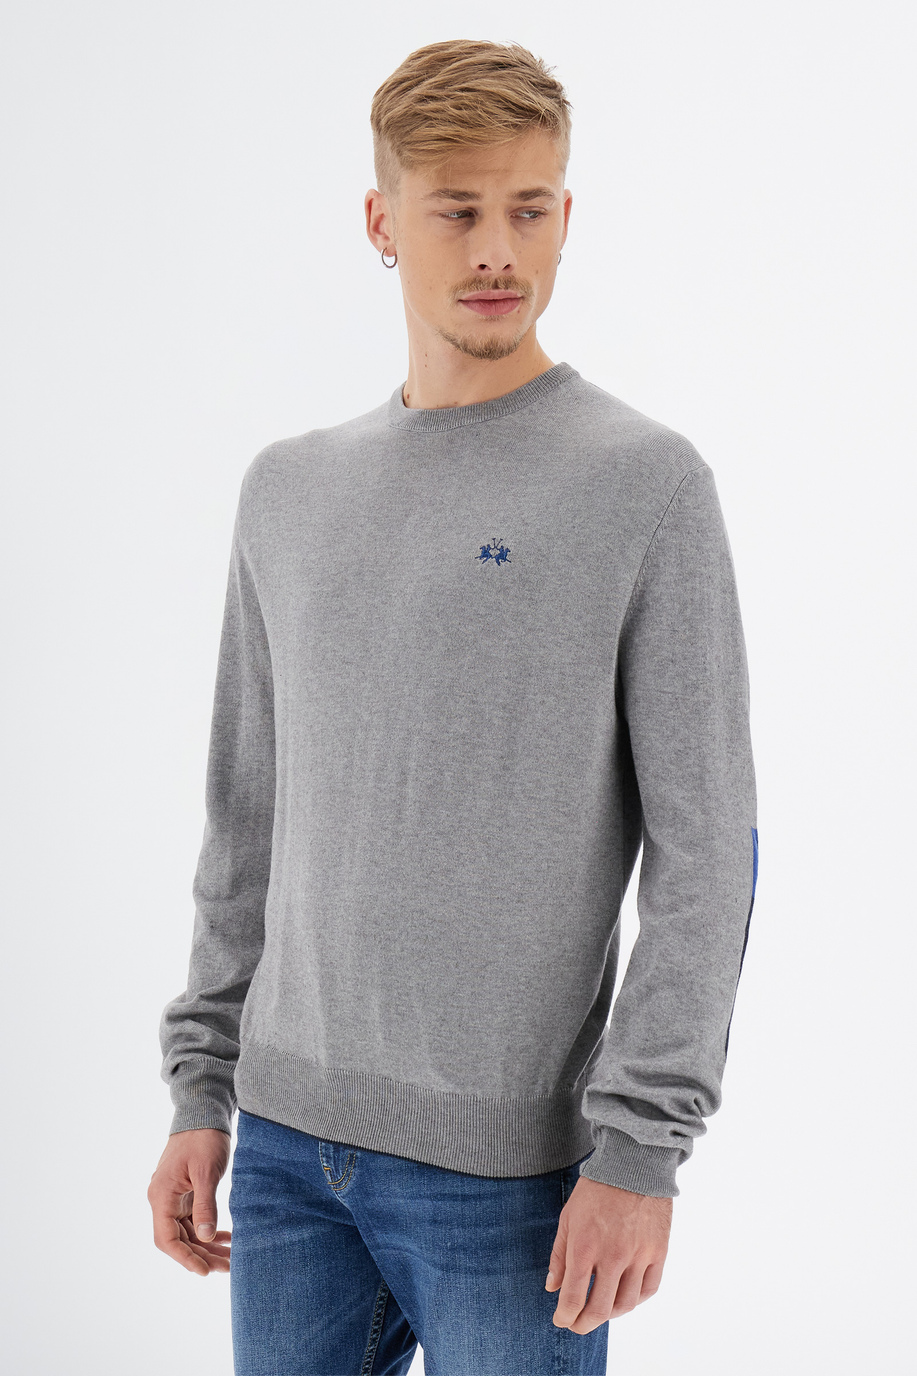 Men’s knit sweater with long sleeves in cotton blend wool regular fit crew neck - Knitwear | La Martina - Official Online Shop